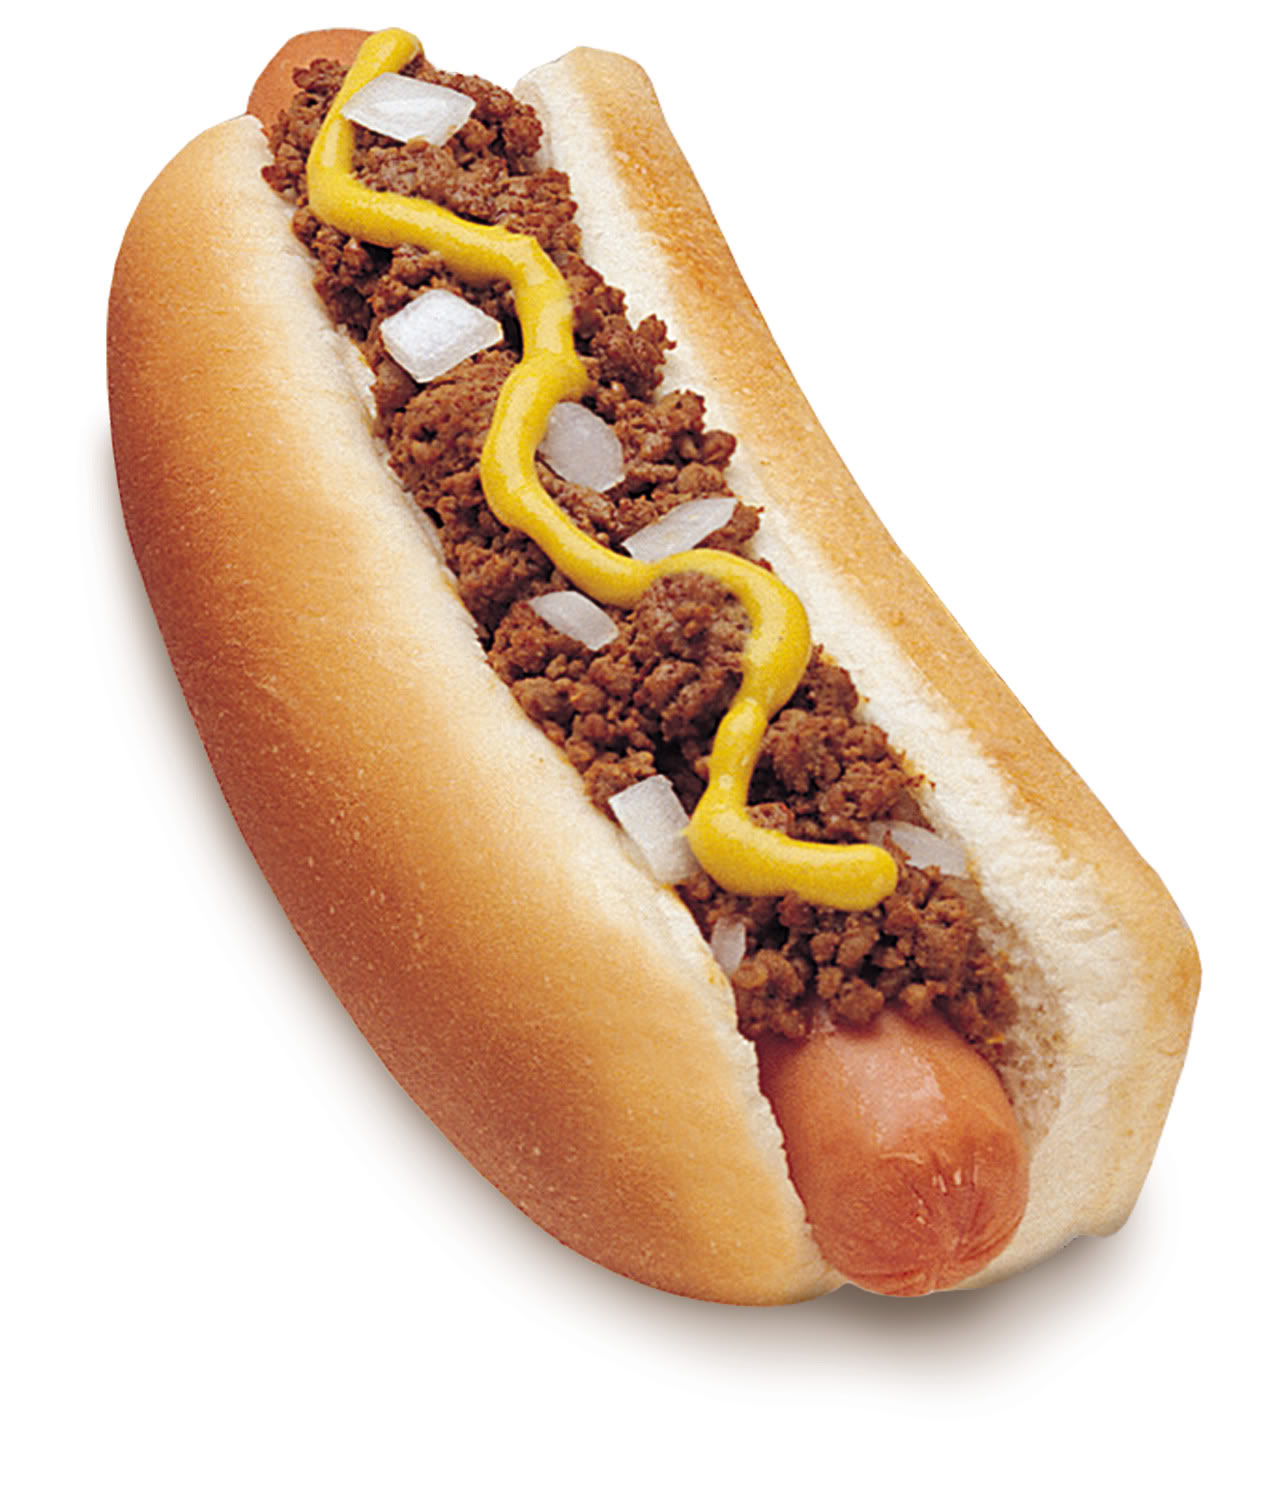 free clipart images of hot dogs - photo #43